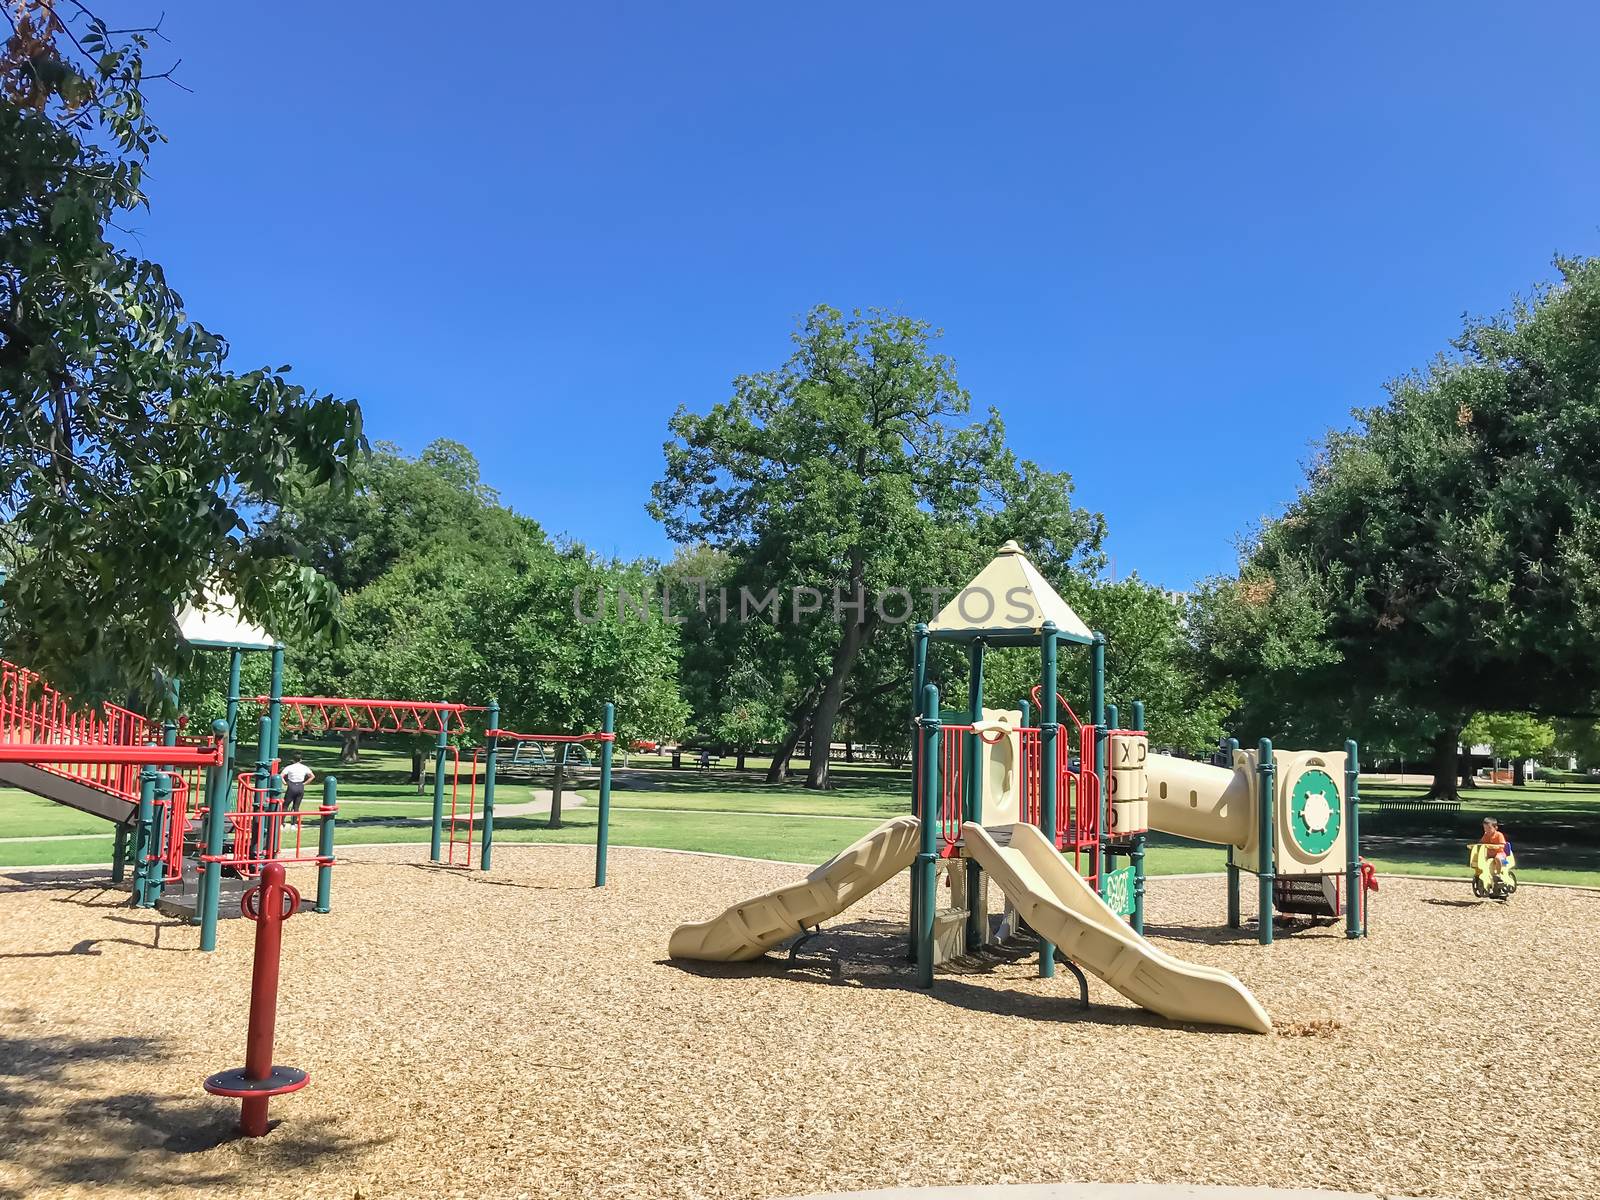 Unidentified toddler Asian boy playing in playground at public park surrounded by large trees in downtown Dallas, Texas, USA by trongnguyen